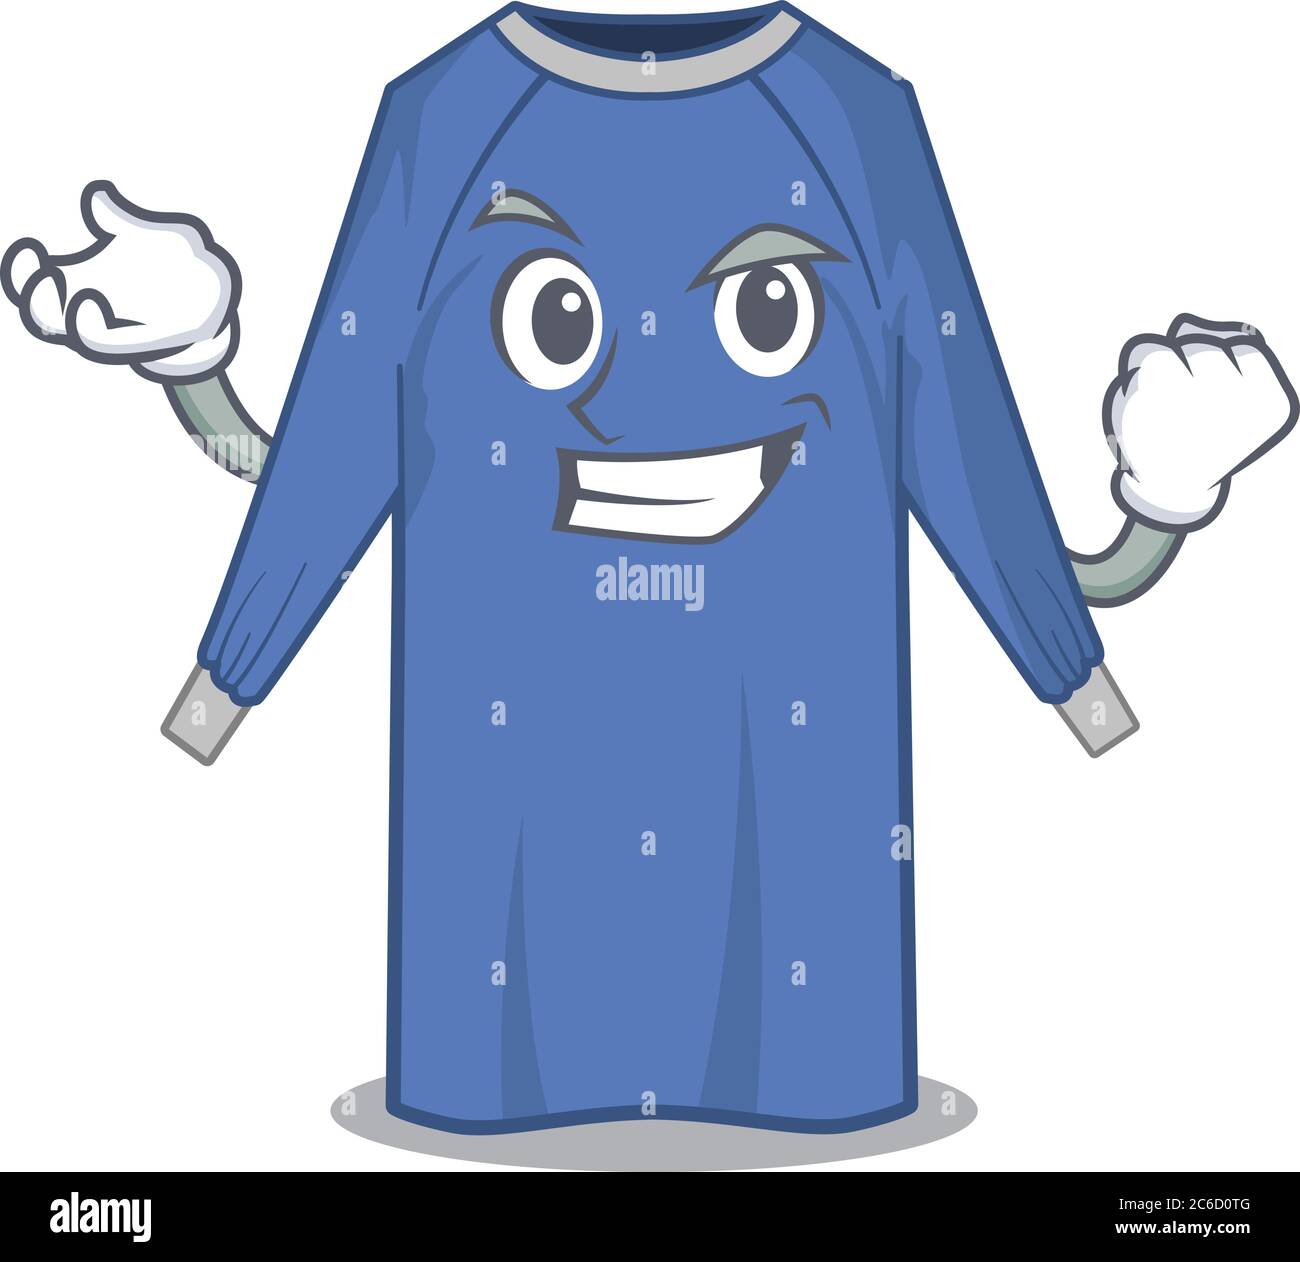 A funny cartoon design concept of disposable clothes with happy face ...